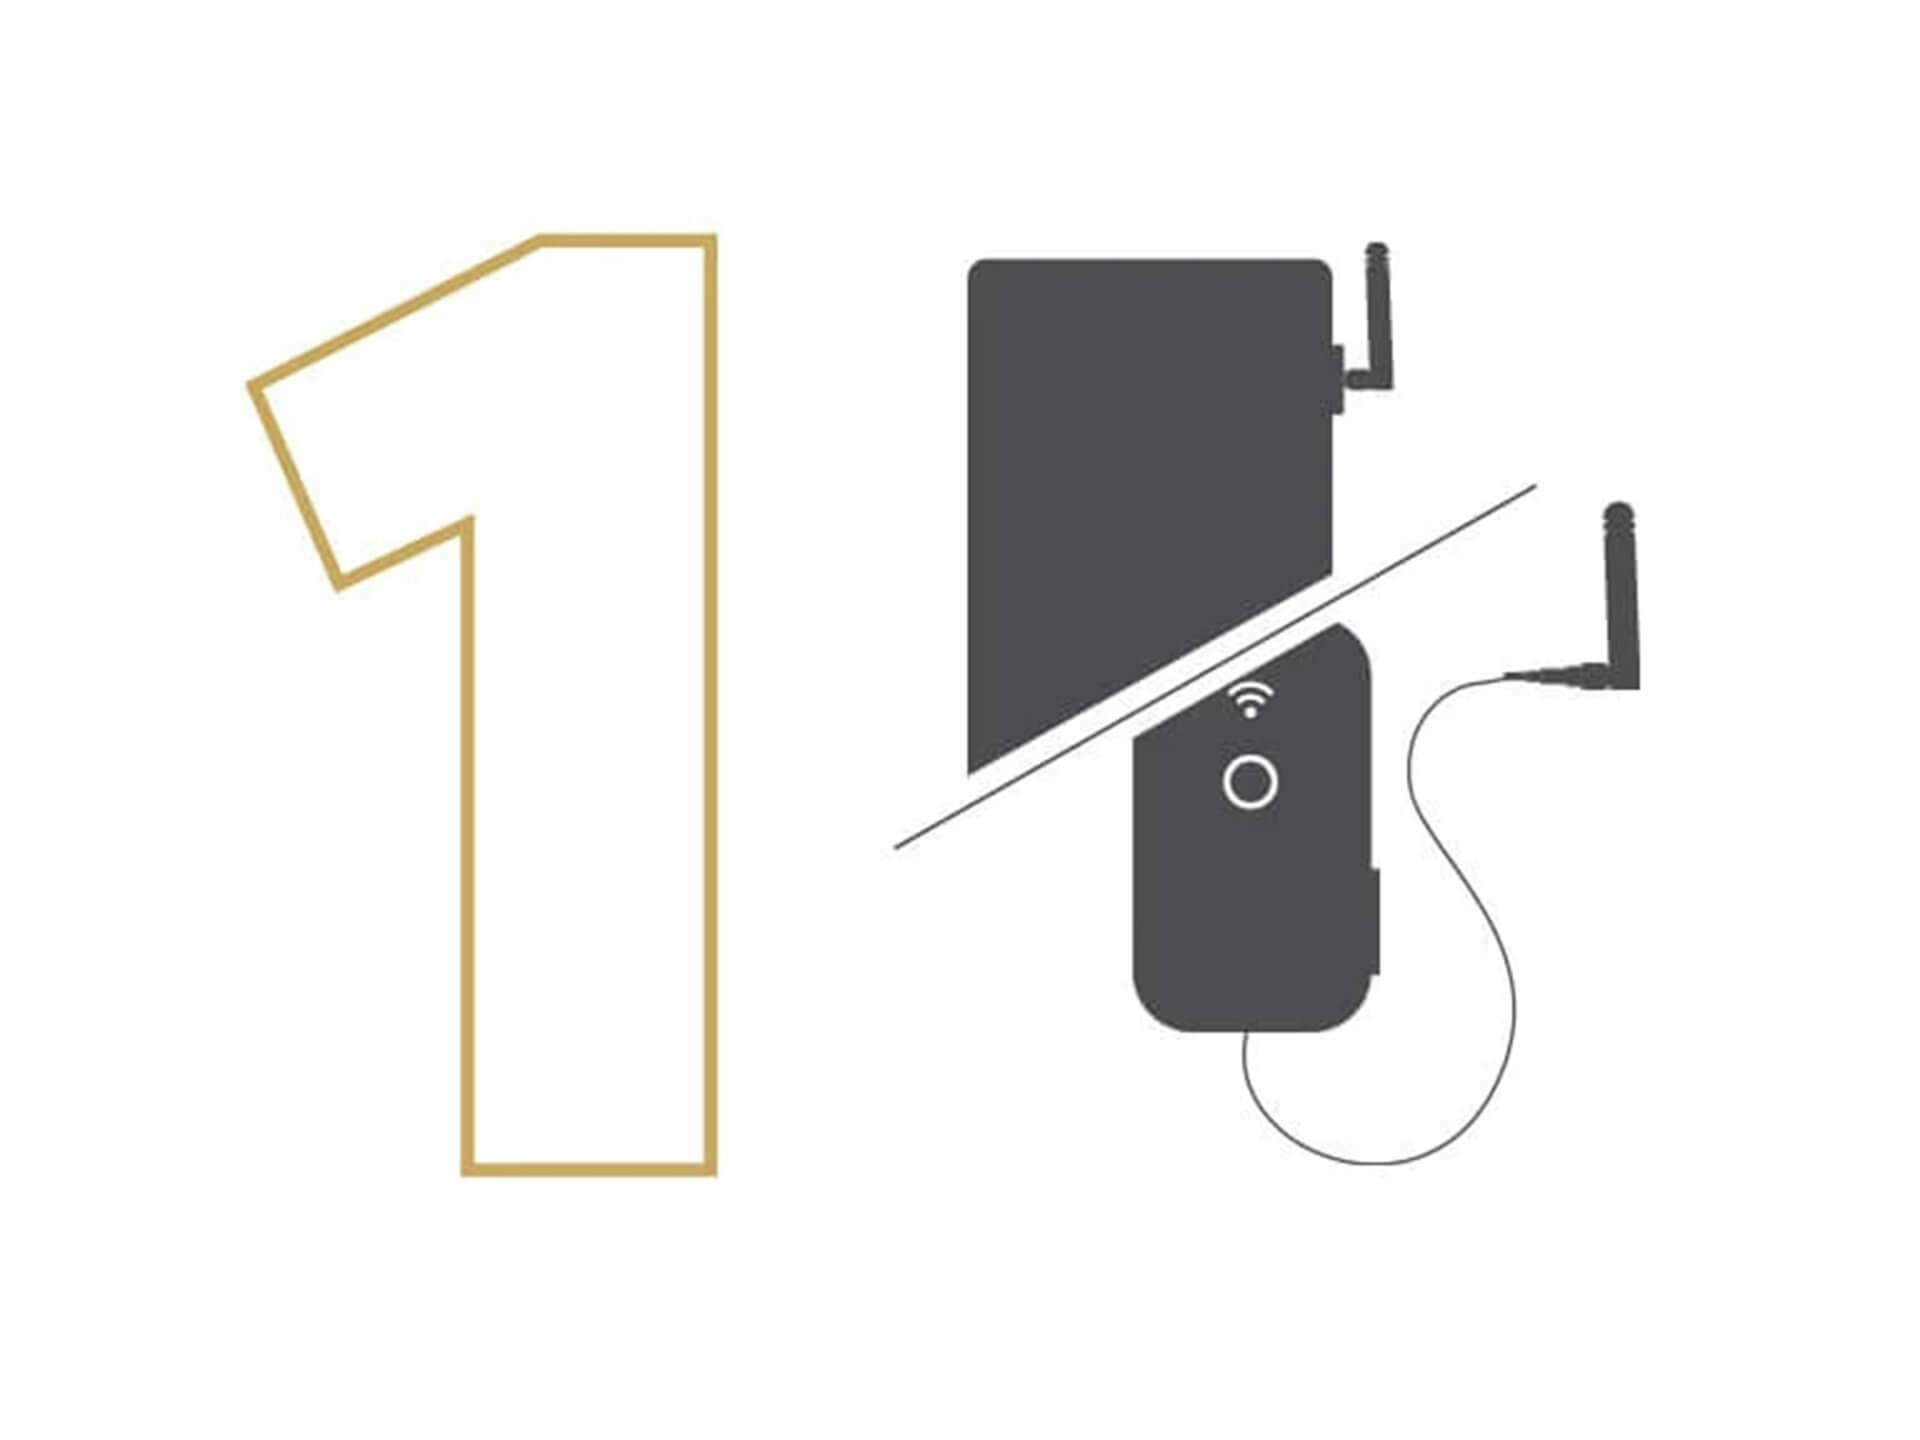 '1' next to an illustrated silhouette of a transformer